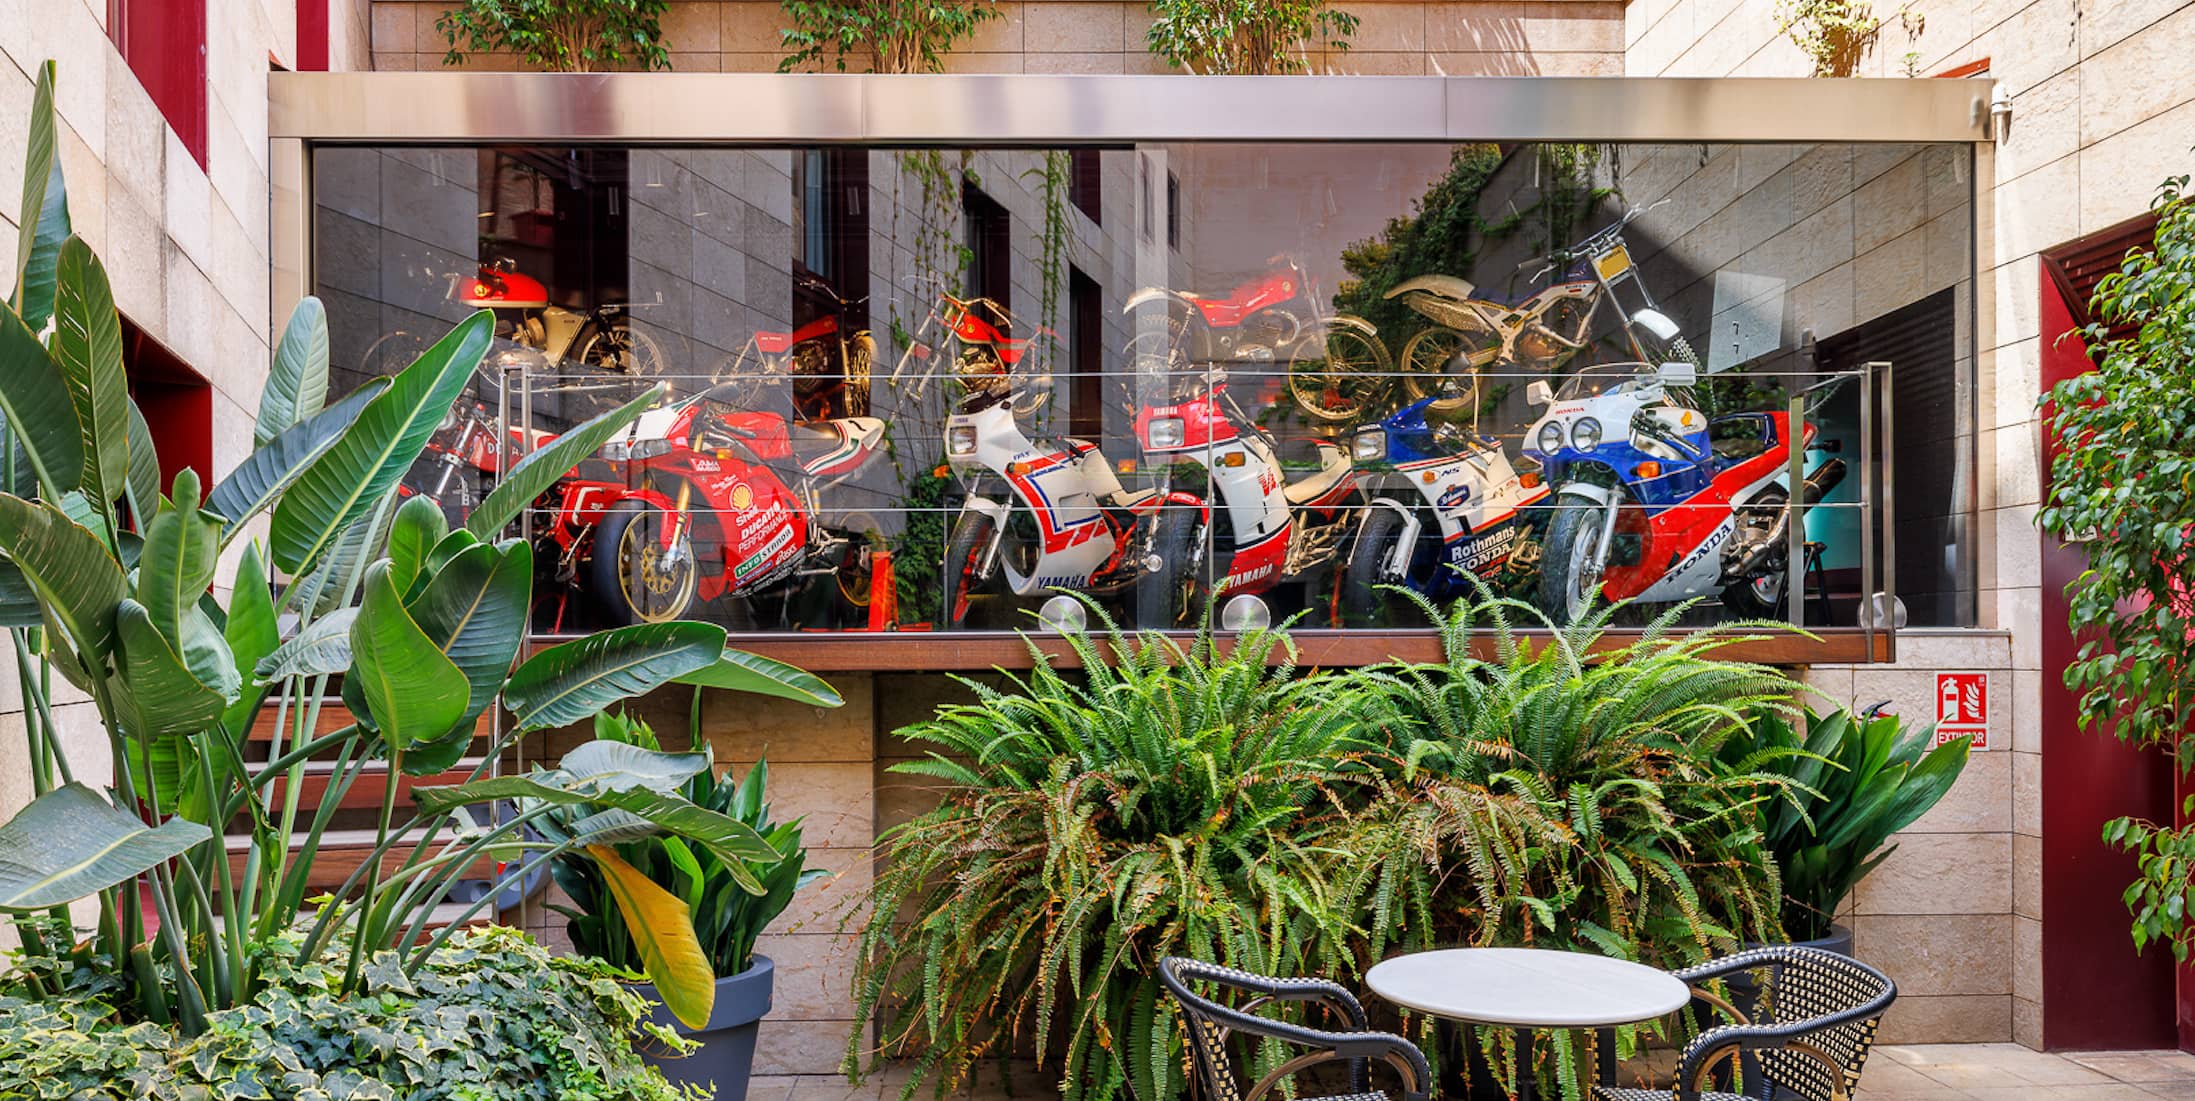 Image of the small inner terrace with motorbikes expositor